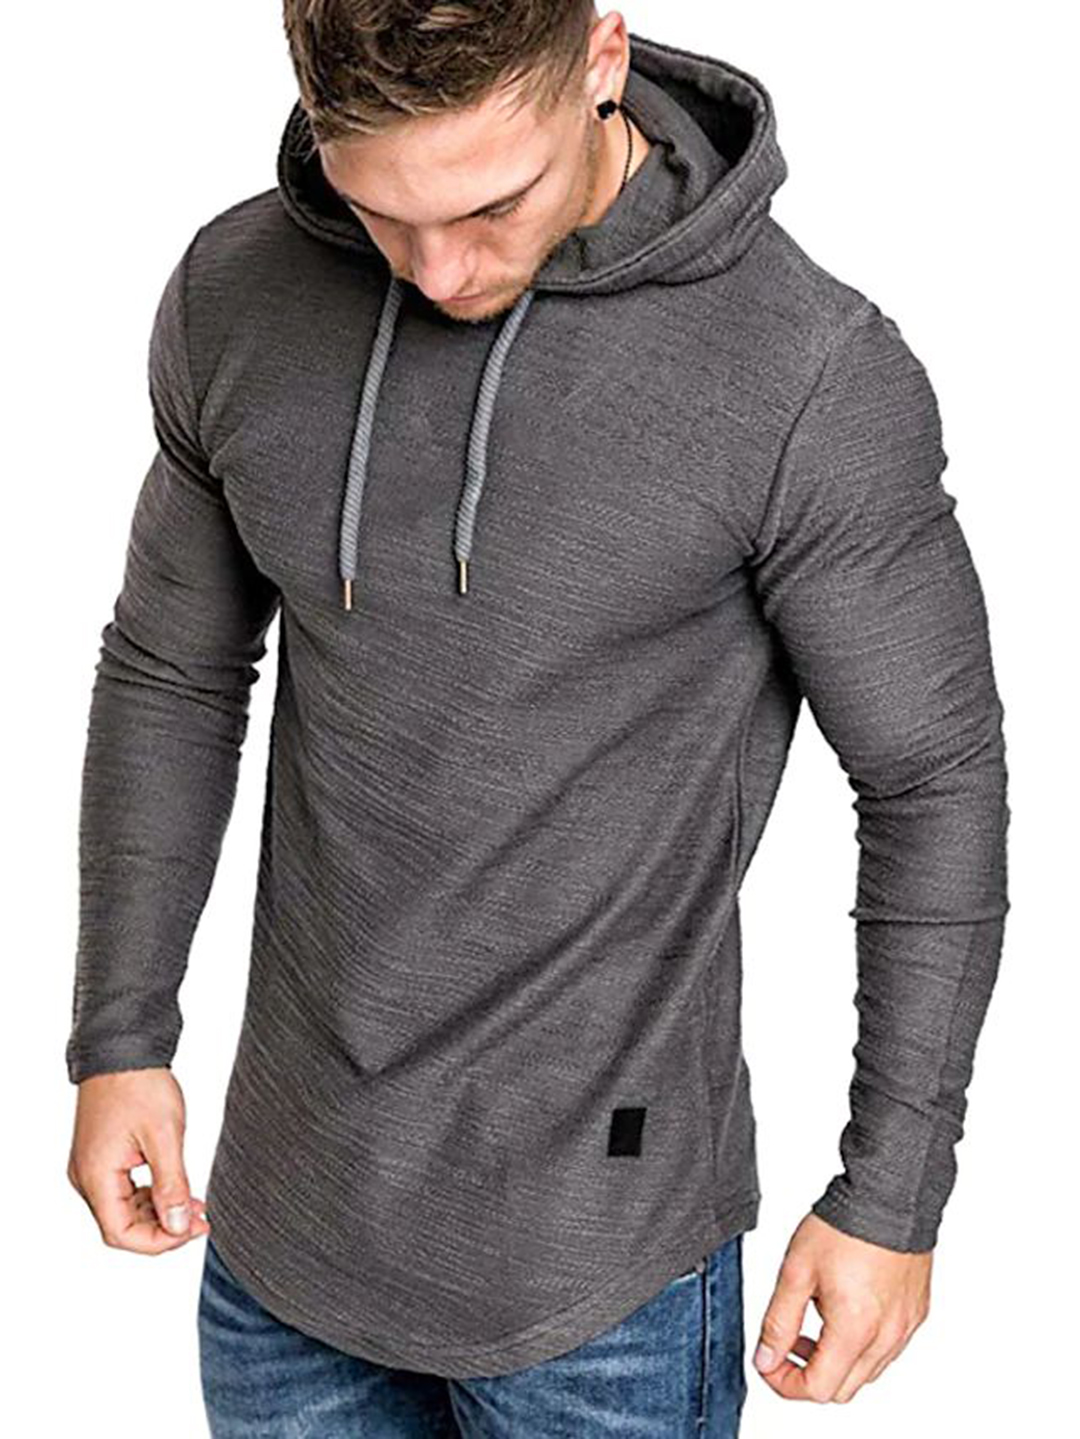 Men's Pullover Sports Casual Hoodies